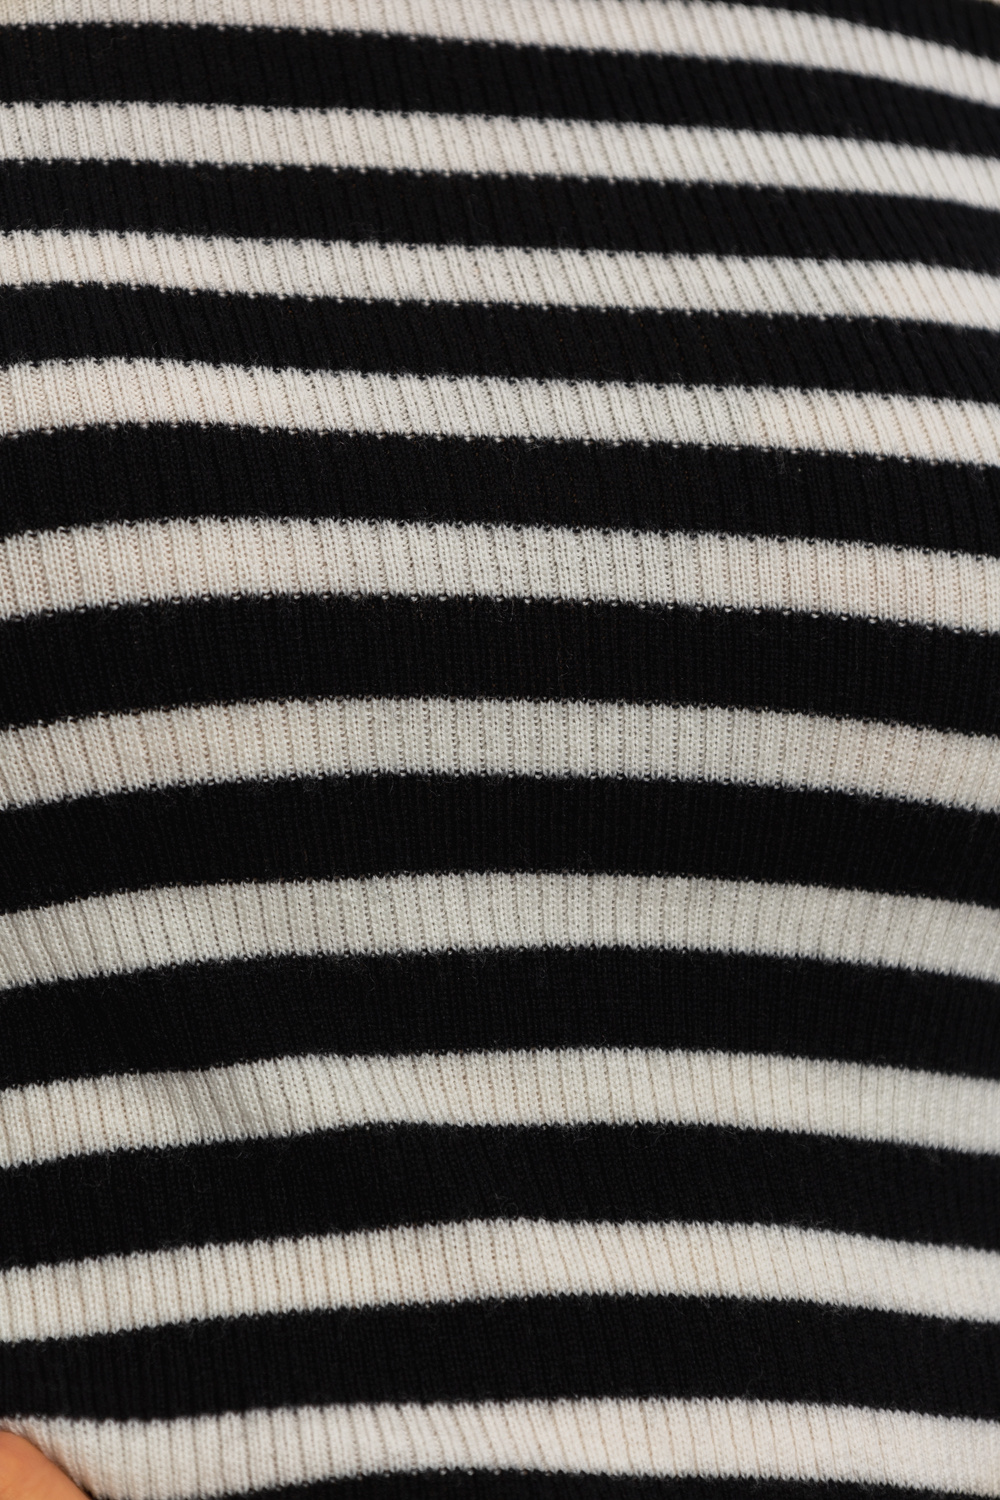 HERSKIND ‘Camb’ sweater